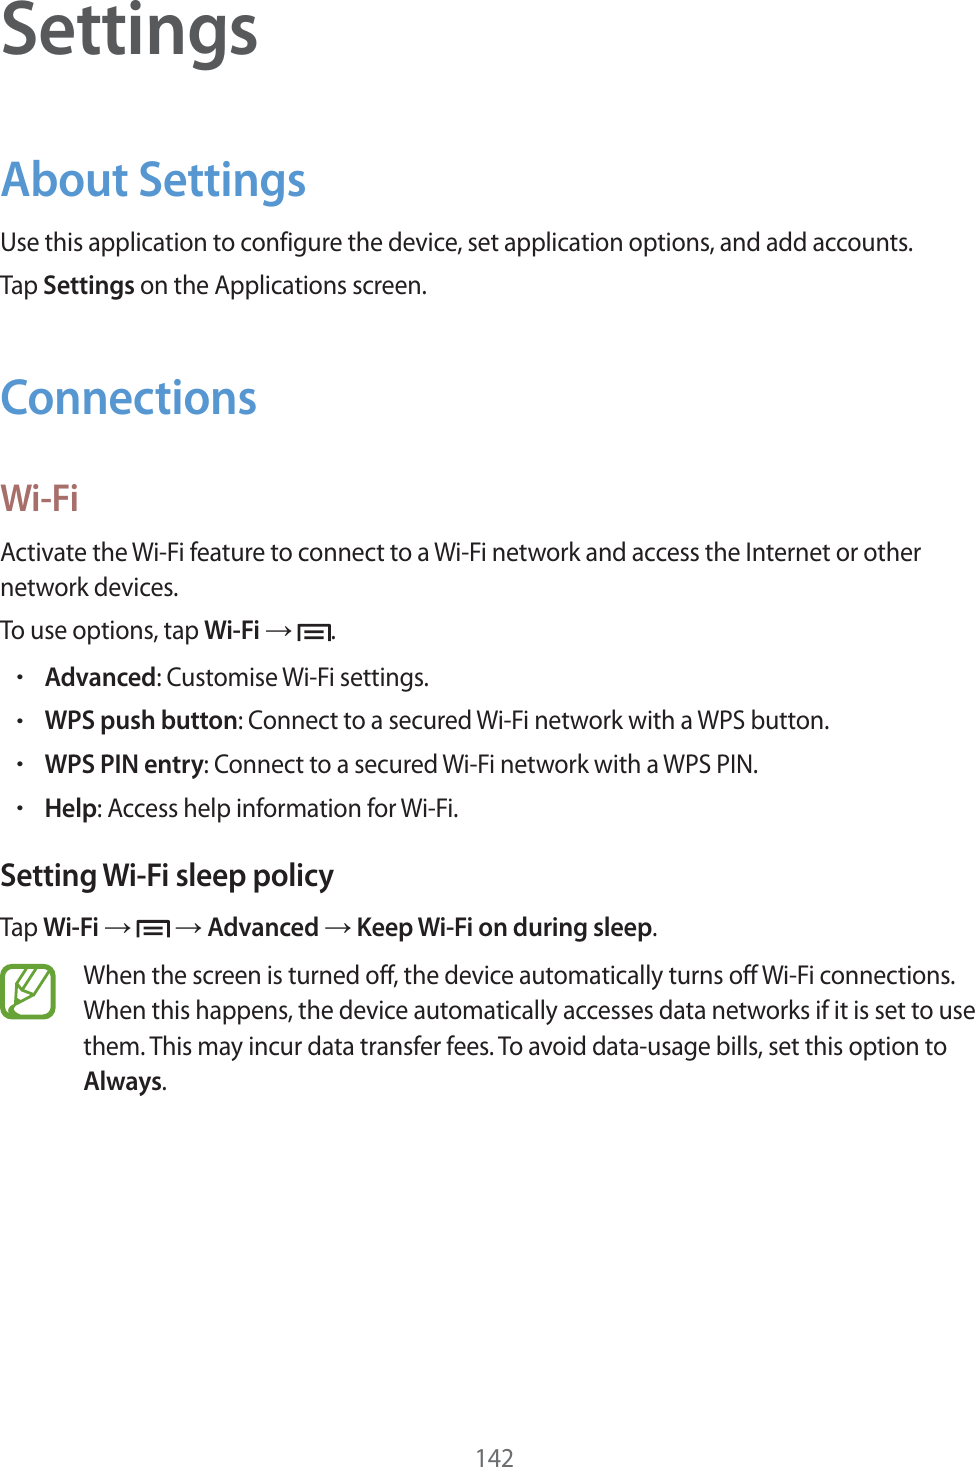 142SettingsAbout SettingsUse this application to configure the device, set application options, and add accounts.Tap Settings on the Applications screen.ConnectionsWi-FiActivate the Wi-Fi feature to connect to a Wi-Fi network and access the Internet or other network devices.To use options, tap Wi-Fi   .rAdvanced: Customise Wi-Fi settings.rWPS push button: Connect to a secured Wi-Fi network with a WPS button.rWPS PIN entry: Connect to a secured Wi-Fi network with a WPS PIN.rHelp: Access help information for Wi-Fi.Setting Wi-Fi sleep policyTap Wi-Fi     Advanced  Keep Wi-Fi on during sleep.When the screen is turned off, the device automatically turns off Wi-Fi connections. When this happens, the device automatically accesses data networks if it is set to use them. This may incur data transfer fees. To avoid data-usage bills, set this option to Always.